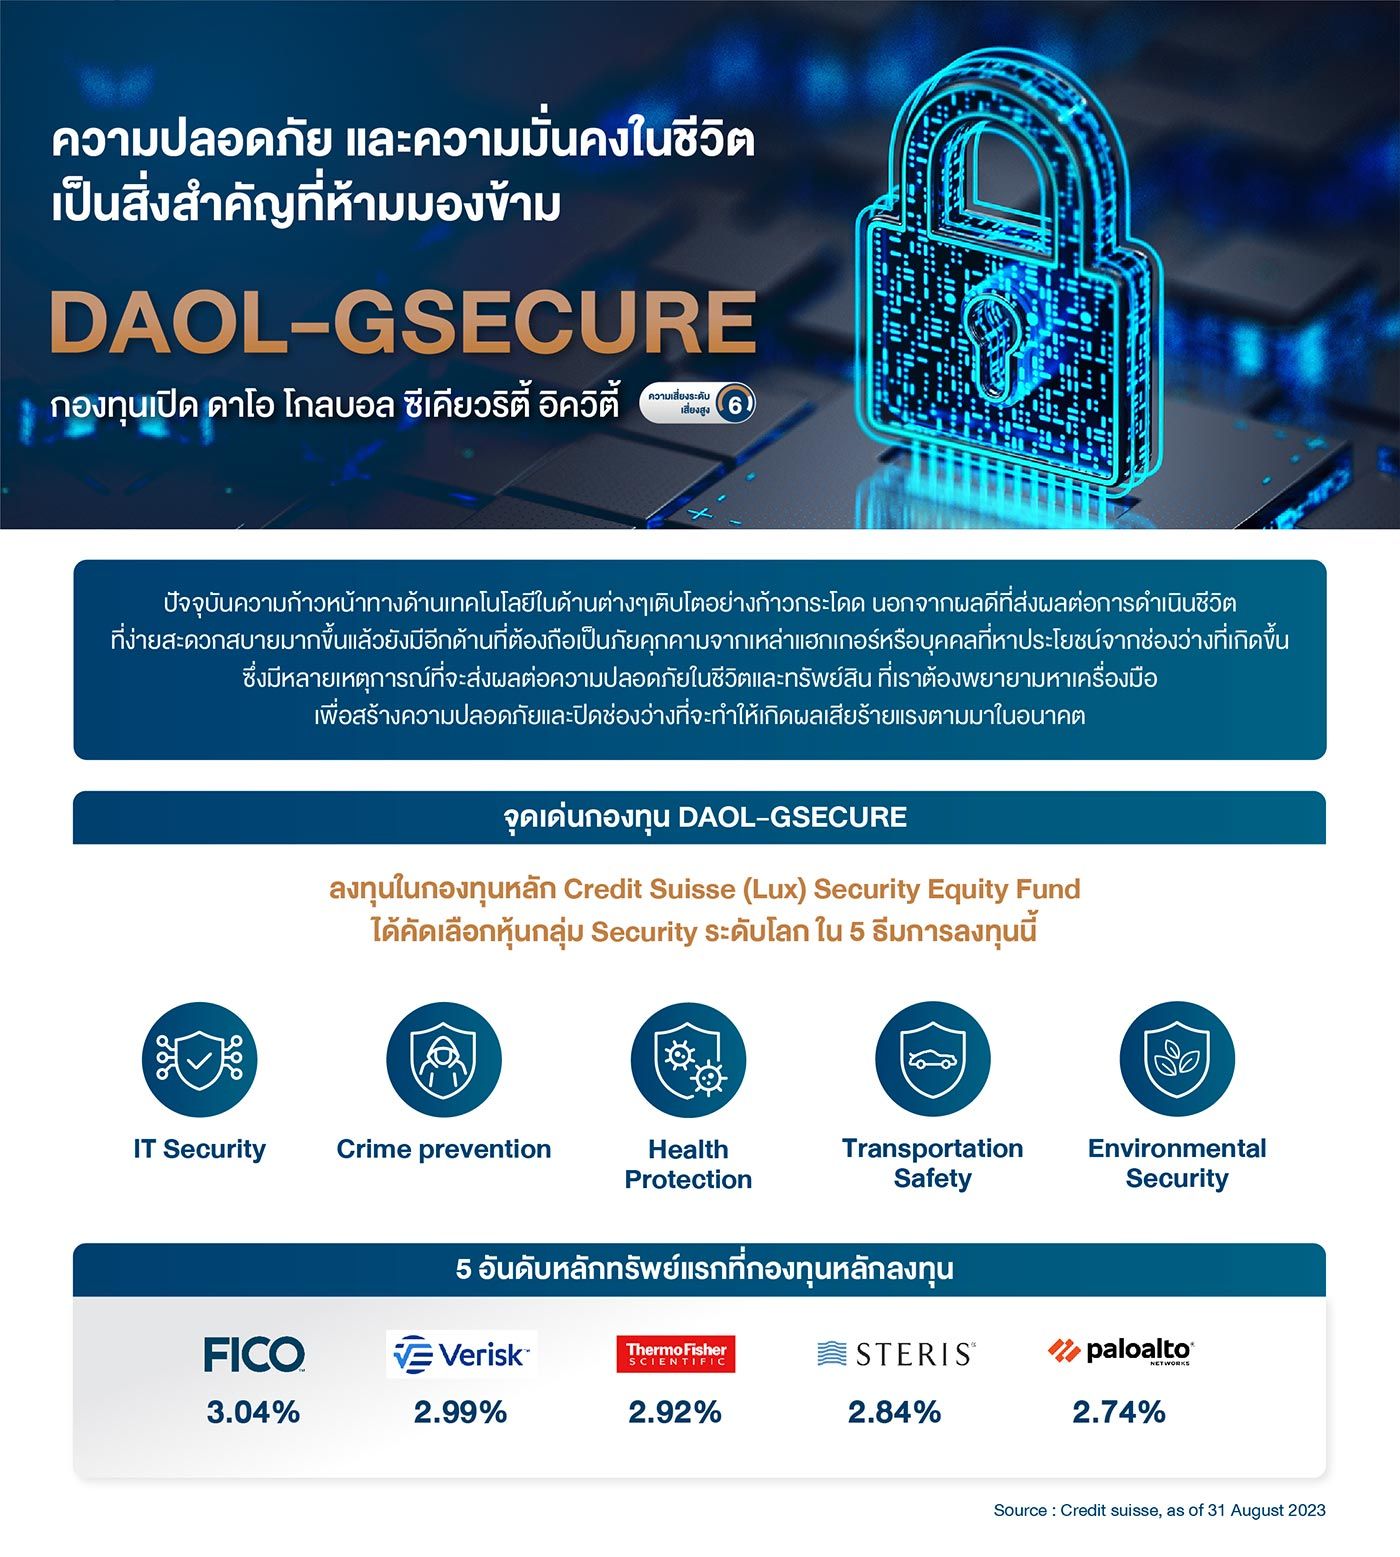 Daol Gsecure for Web